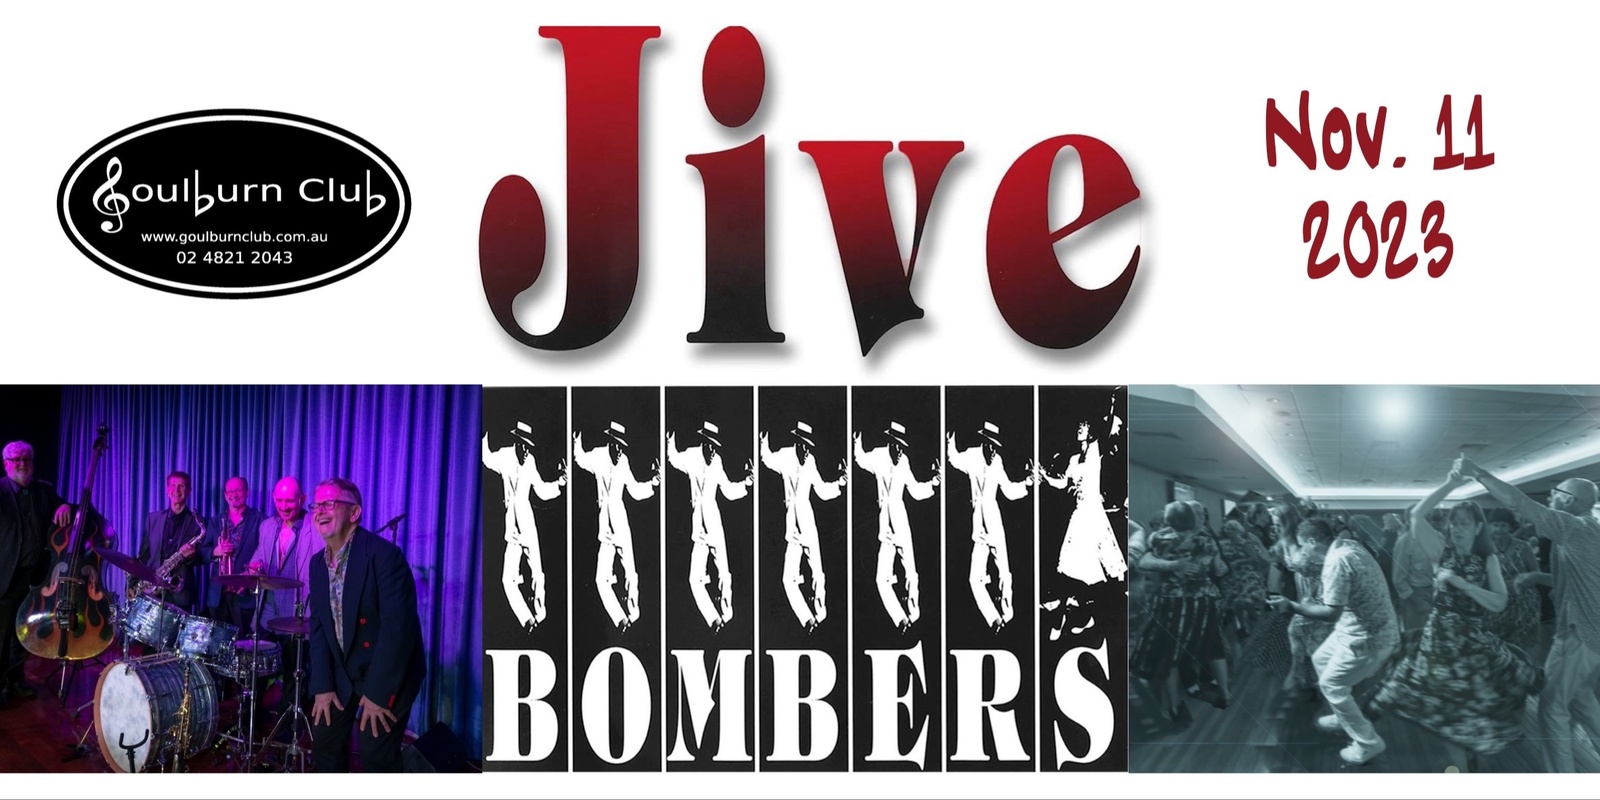 Banner image for Jive Bombers at The Goulburn Club